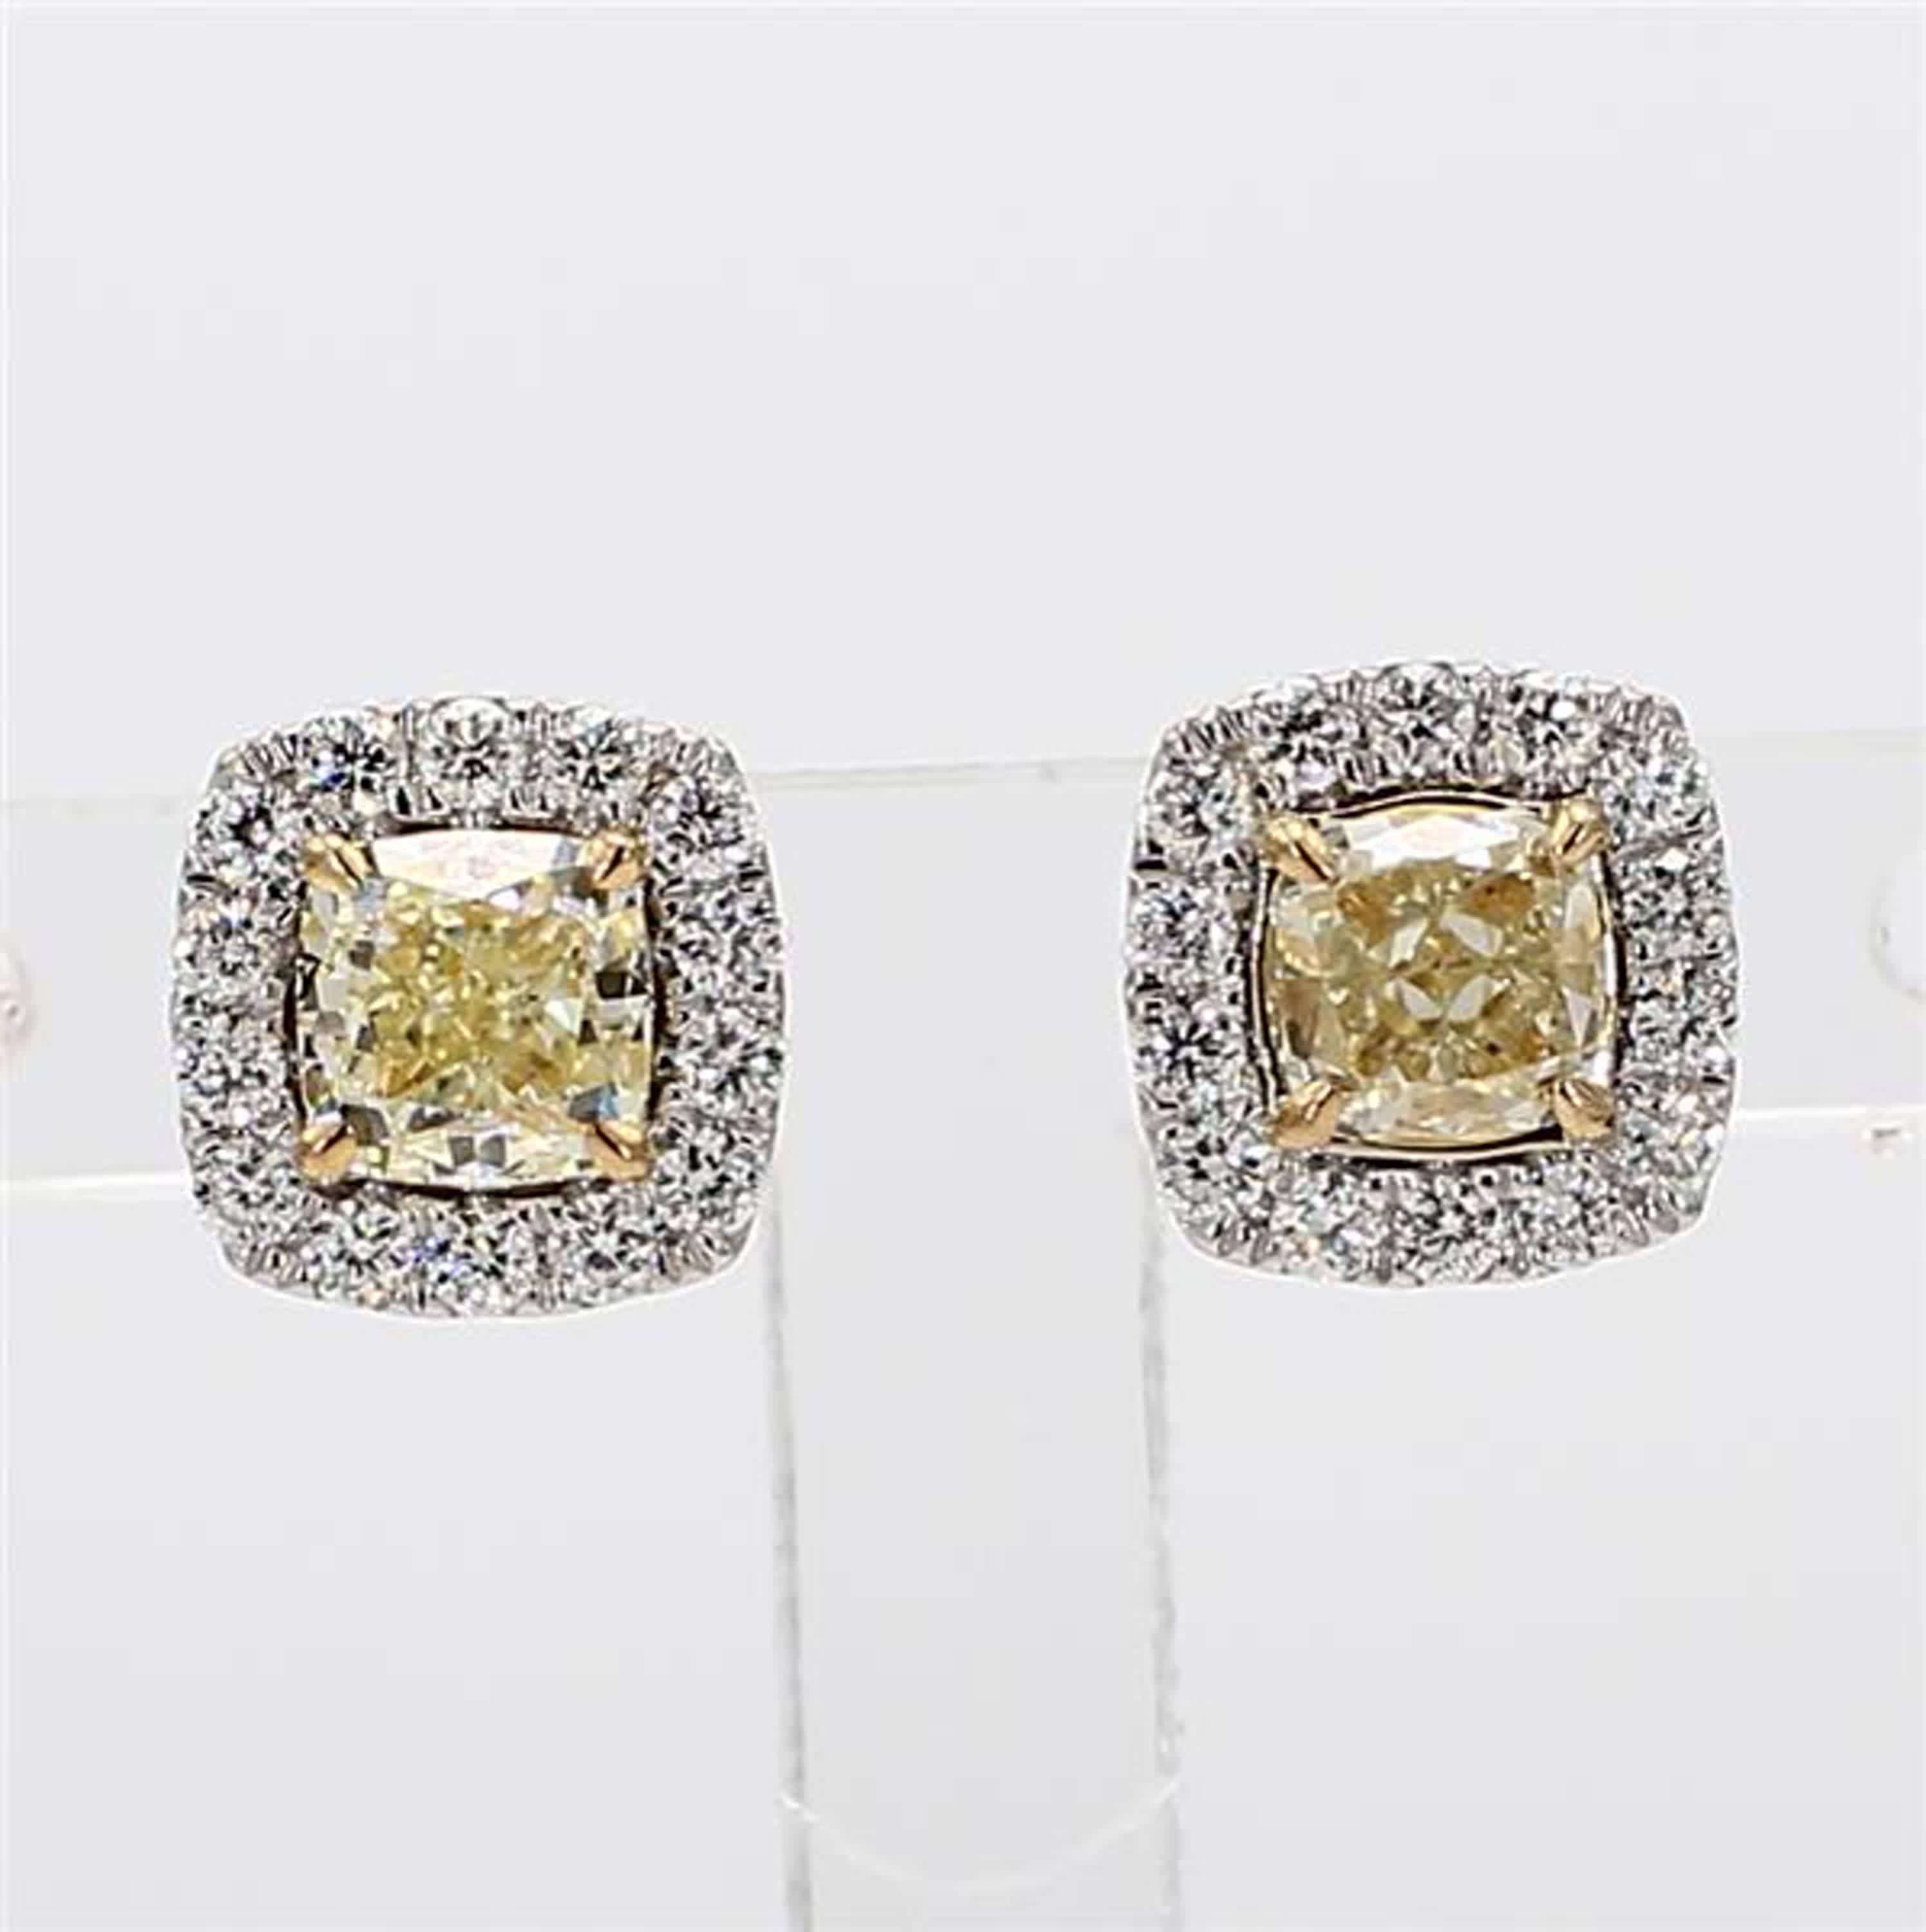 Natural Yellow Cushion and White Diamond 1.25 Carat TW Gold Stud Earrings For Sale 7